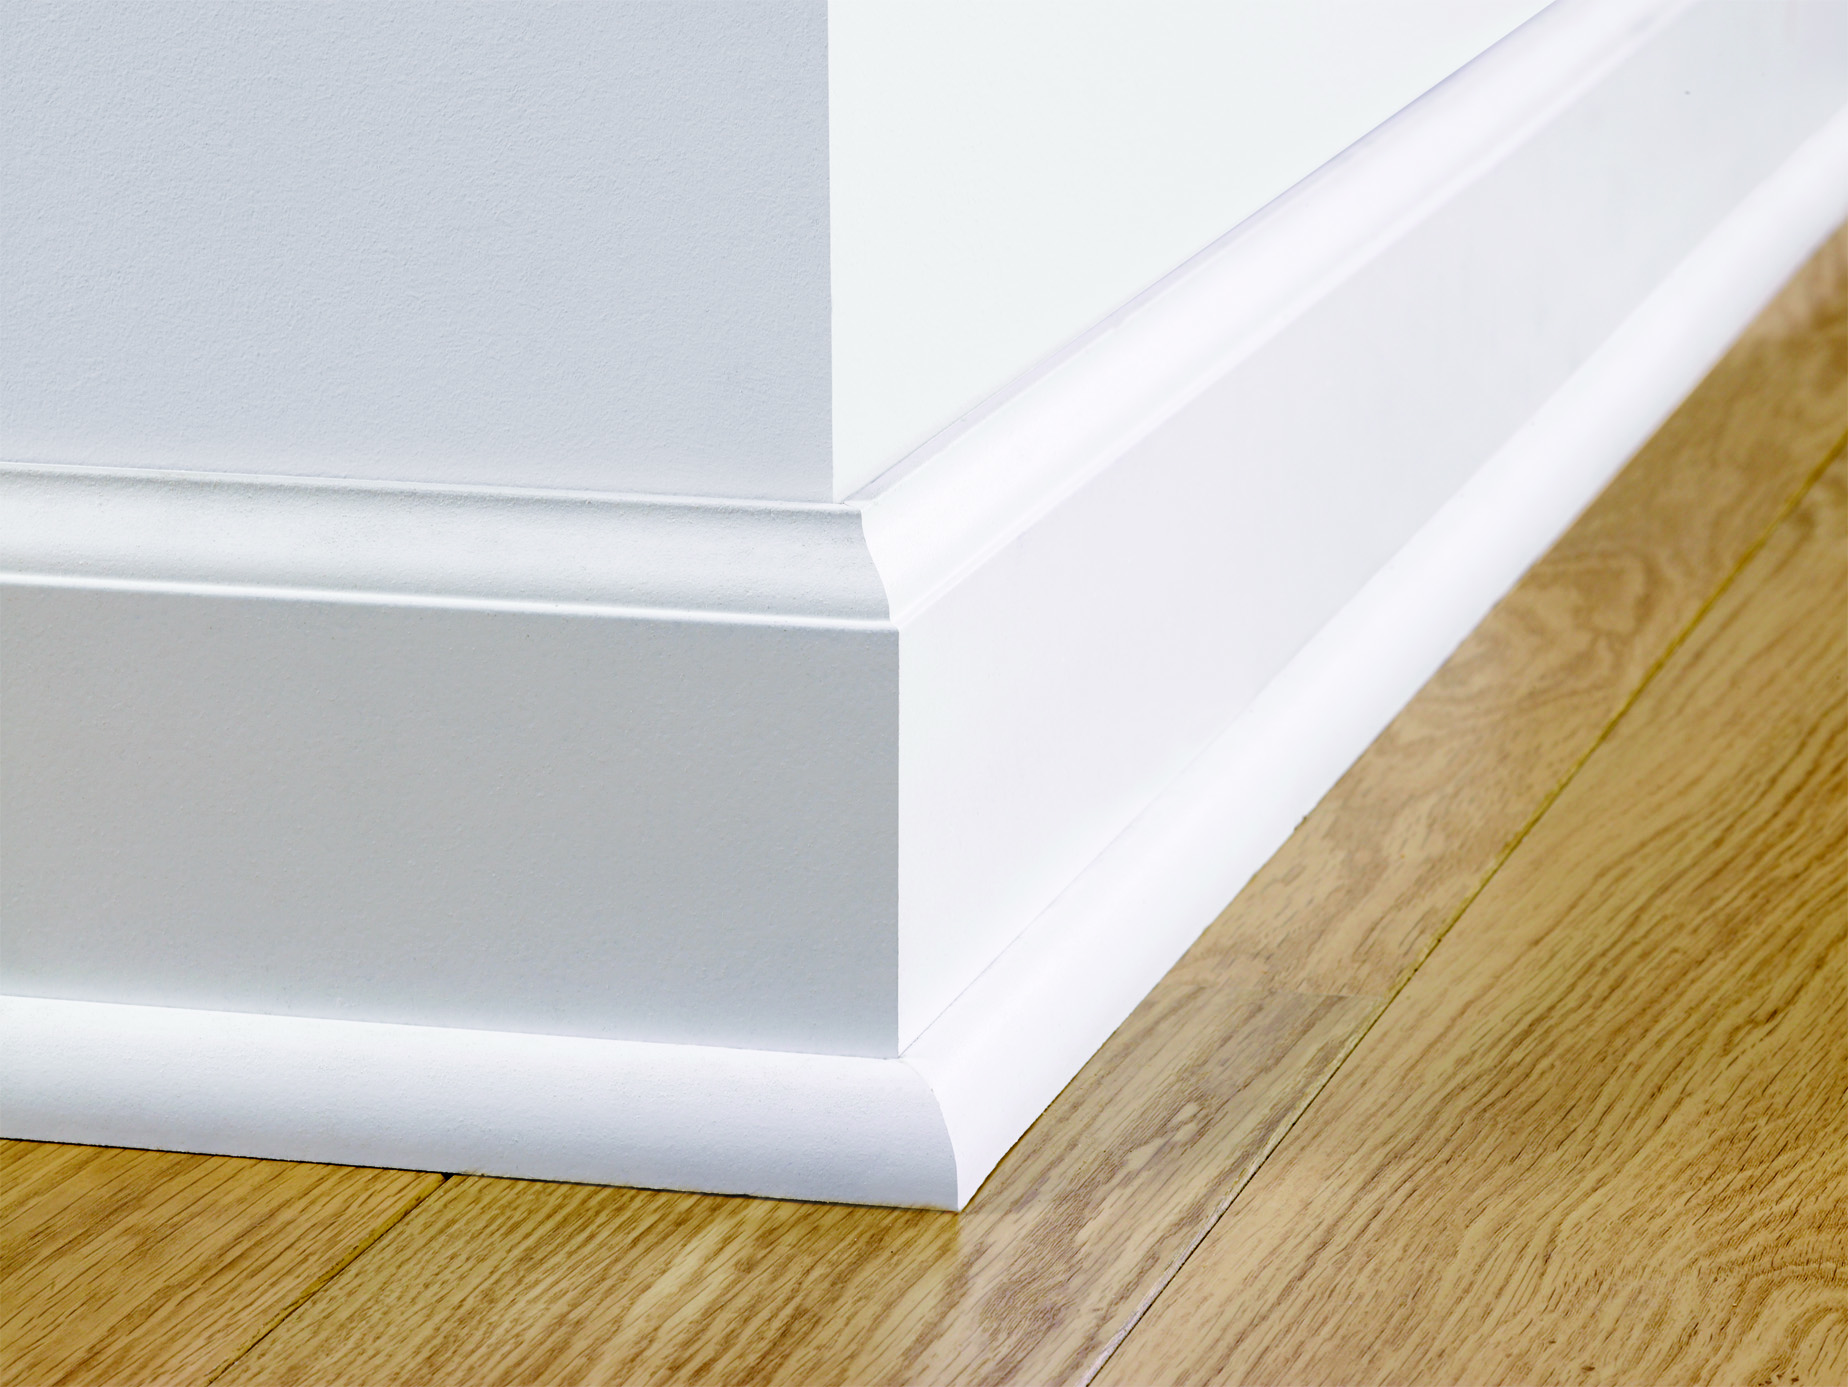 light skirting board made of LDF in the interior of the room